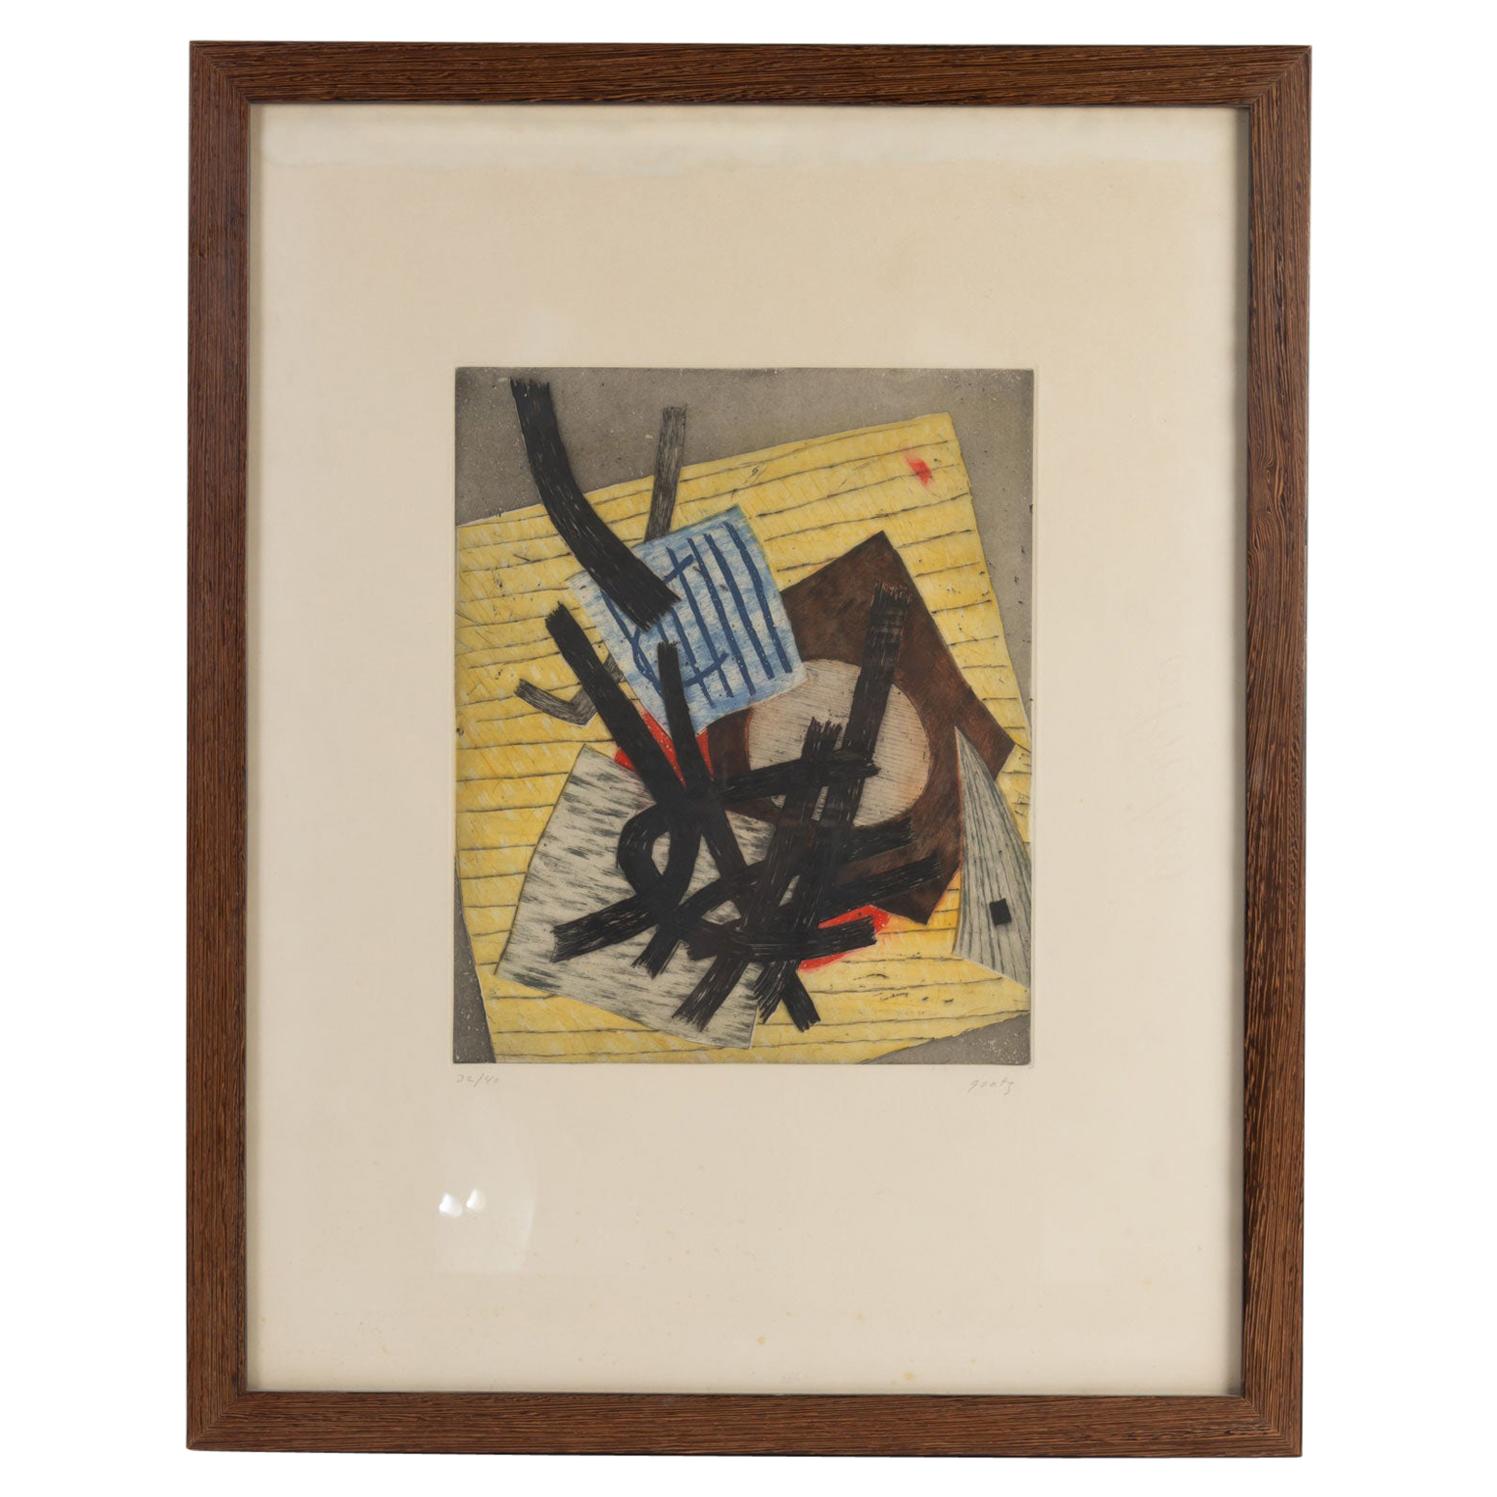 Framed Lithograph by Goetz, Signed and Numbered, 20th Century